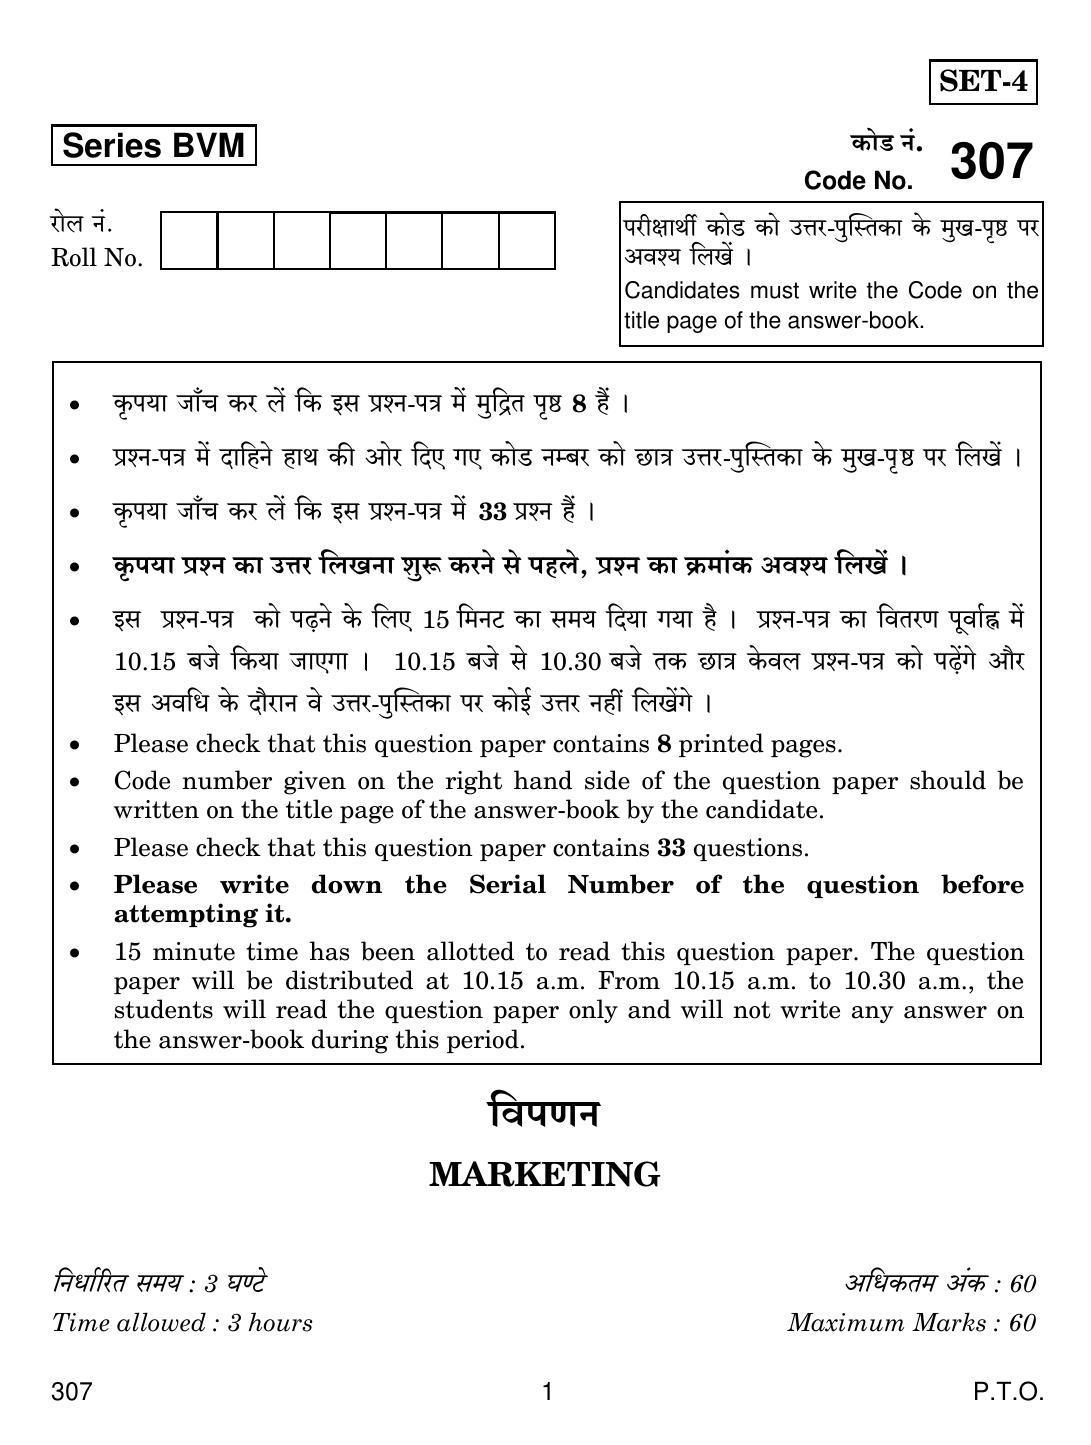 CBSE Class 12 307 Marketing 2019 Question Paper - Page 1